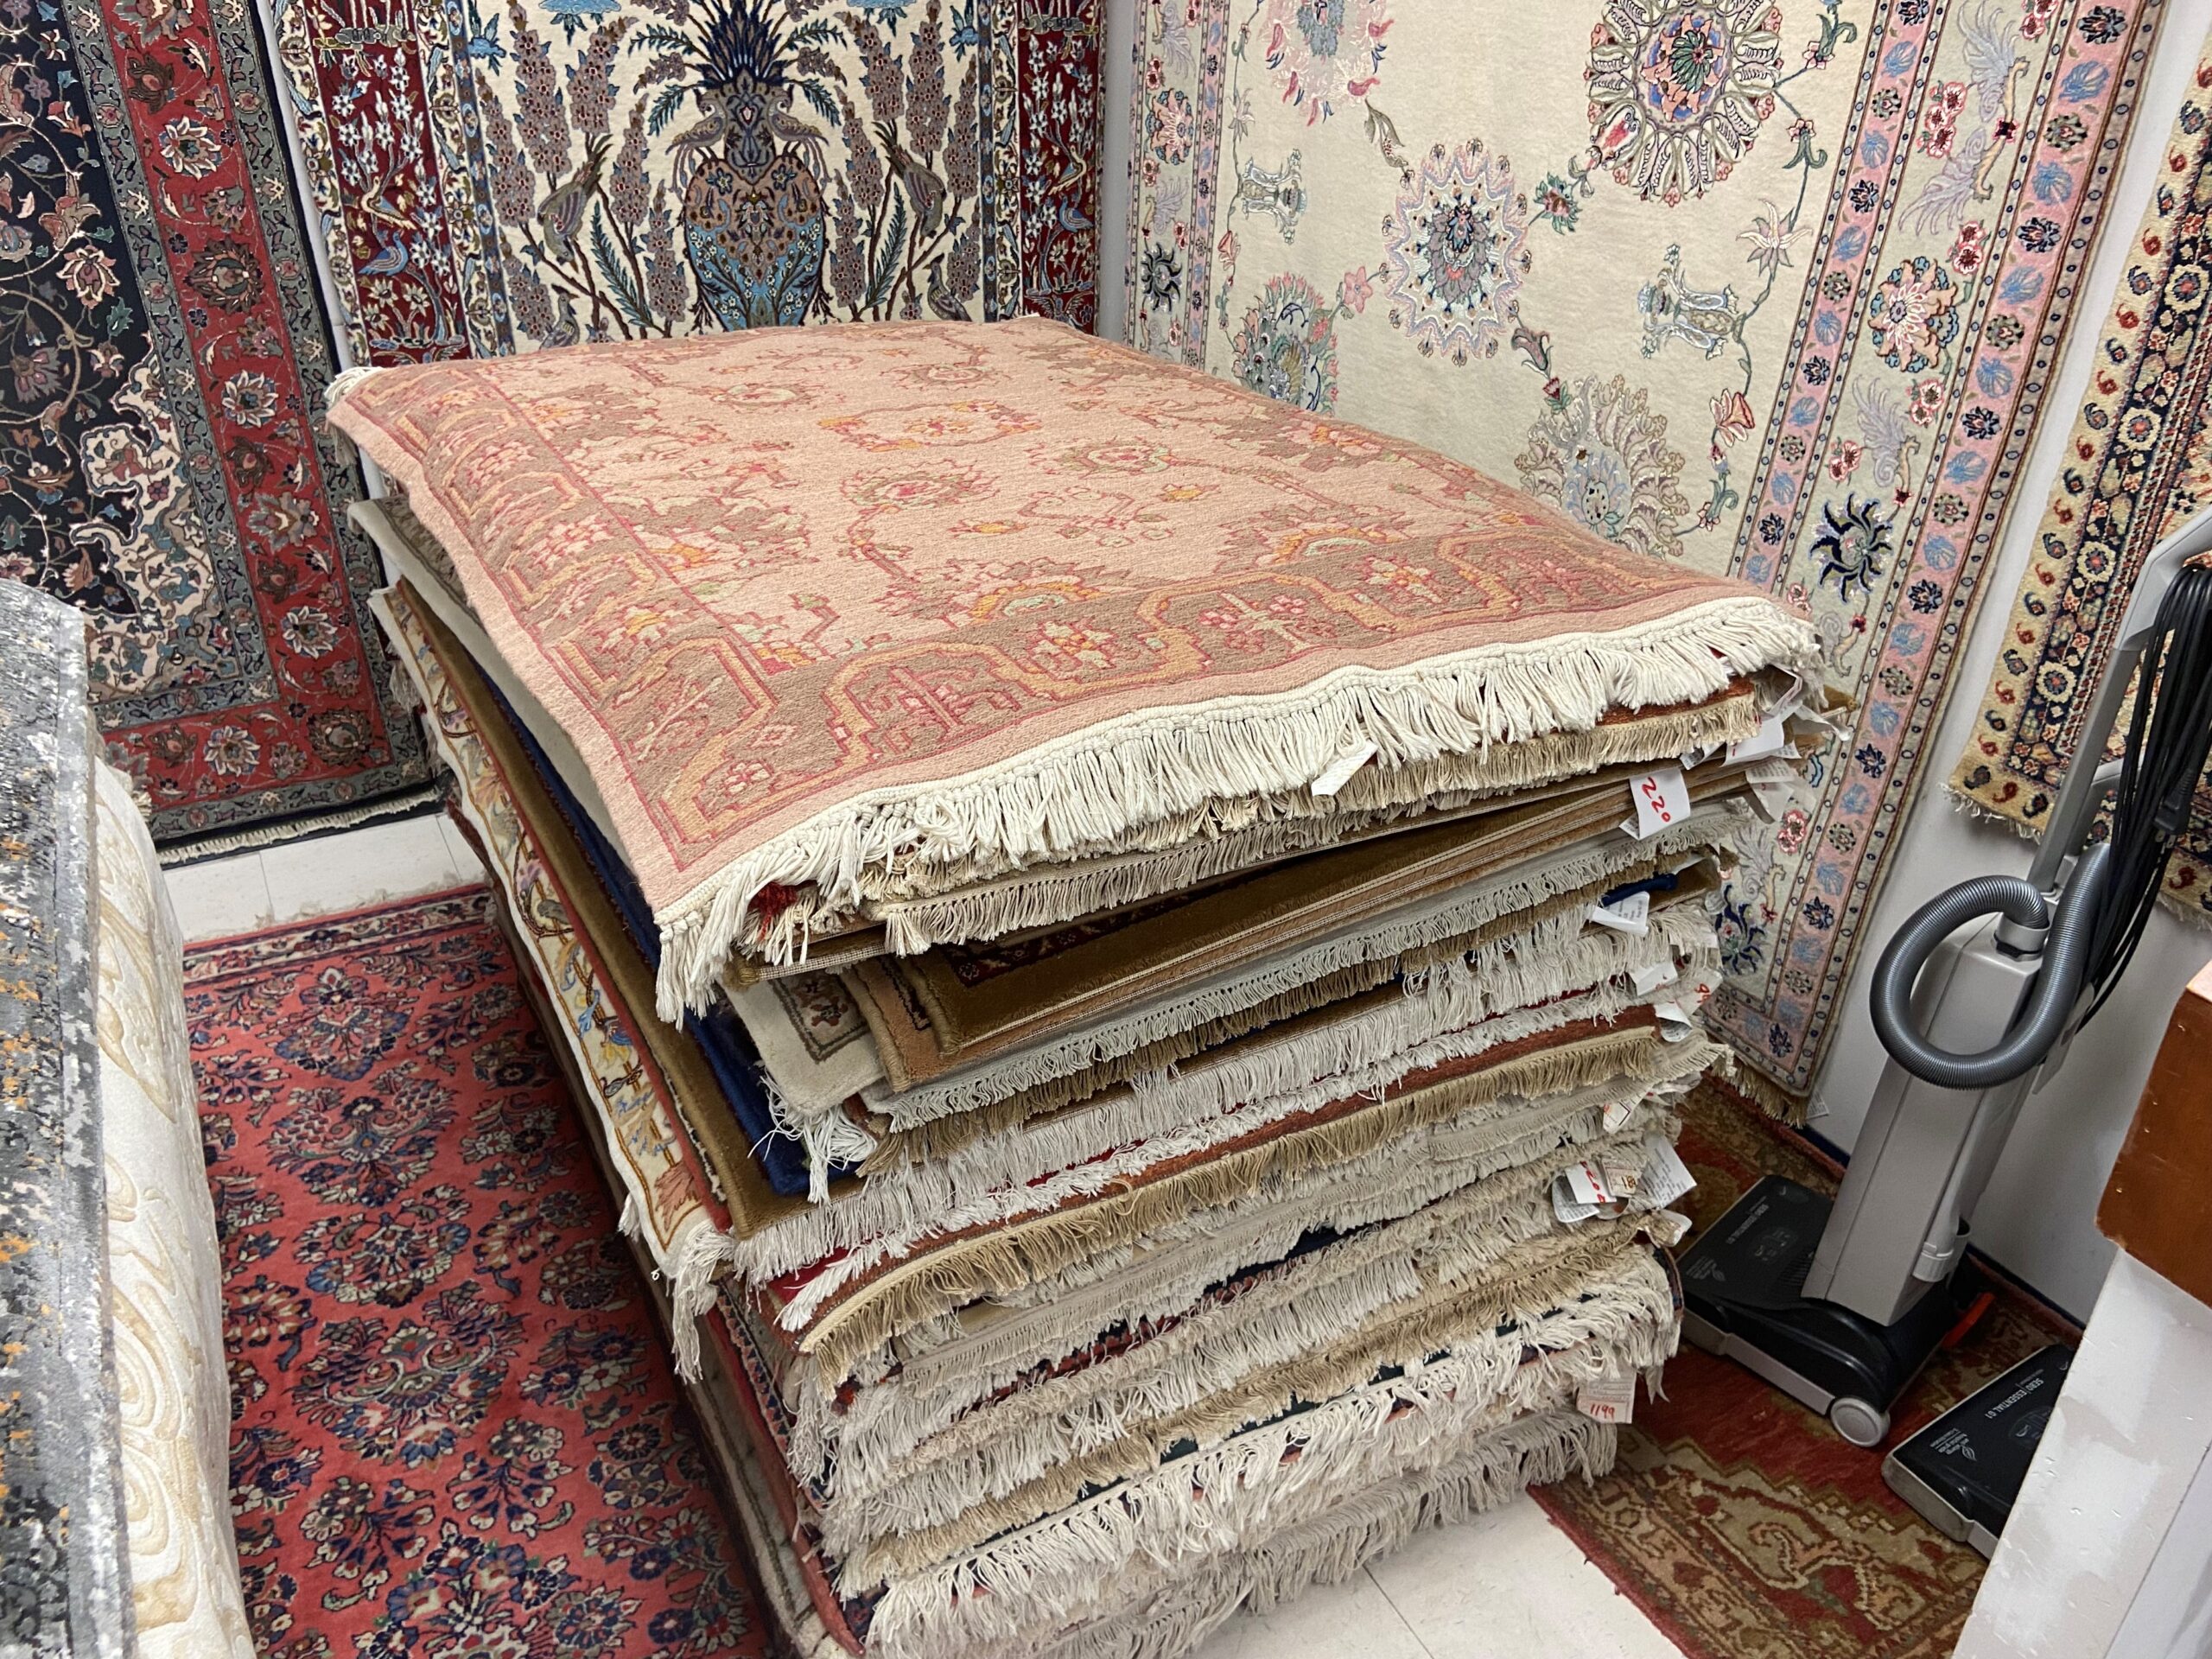 Over 1,000 Area Rugs in Stock